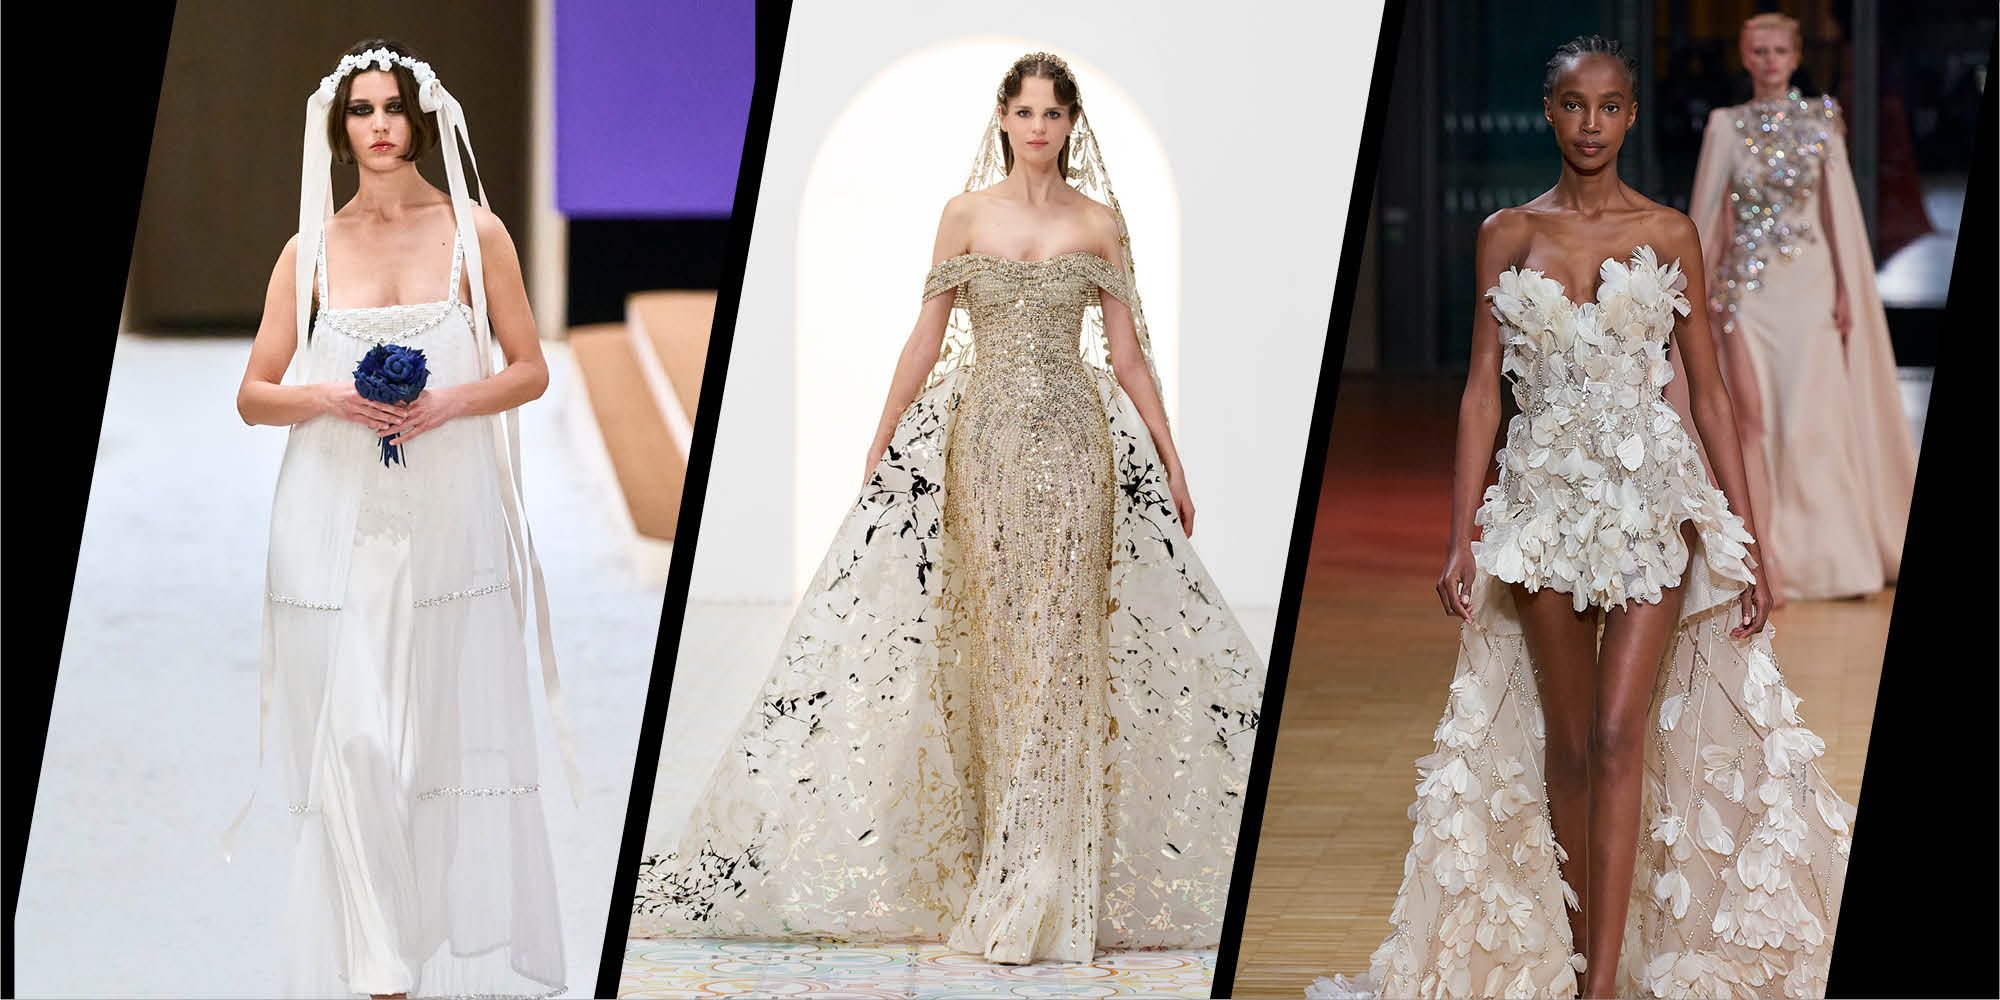 The best wedding dress inspiration from Haute Couture Fashion Week